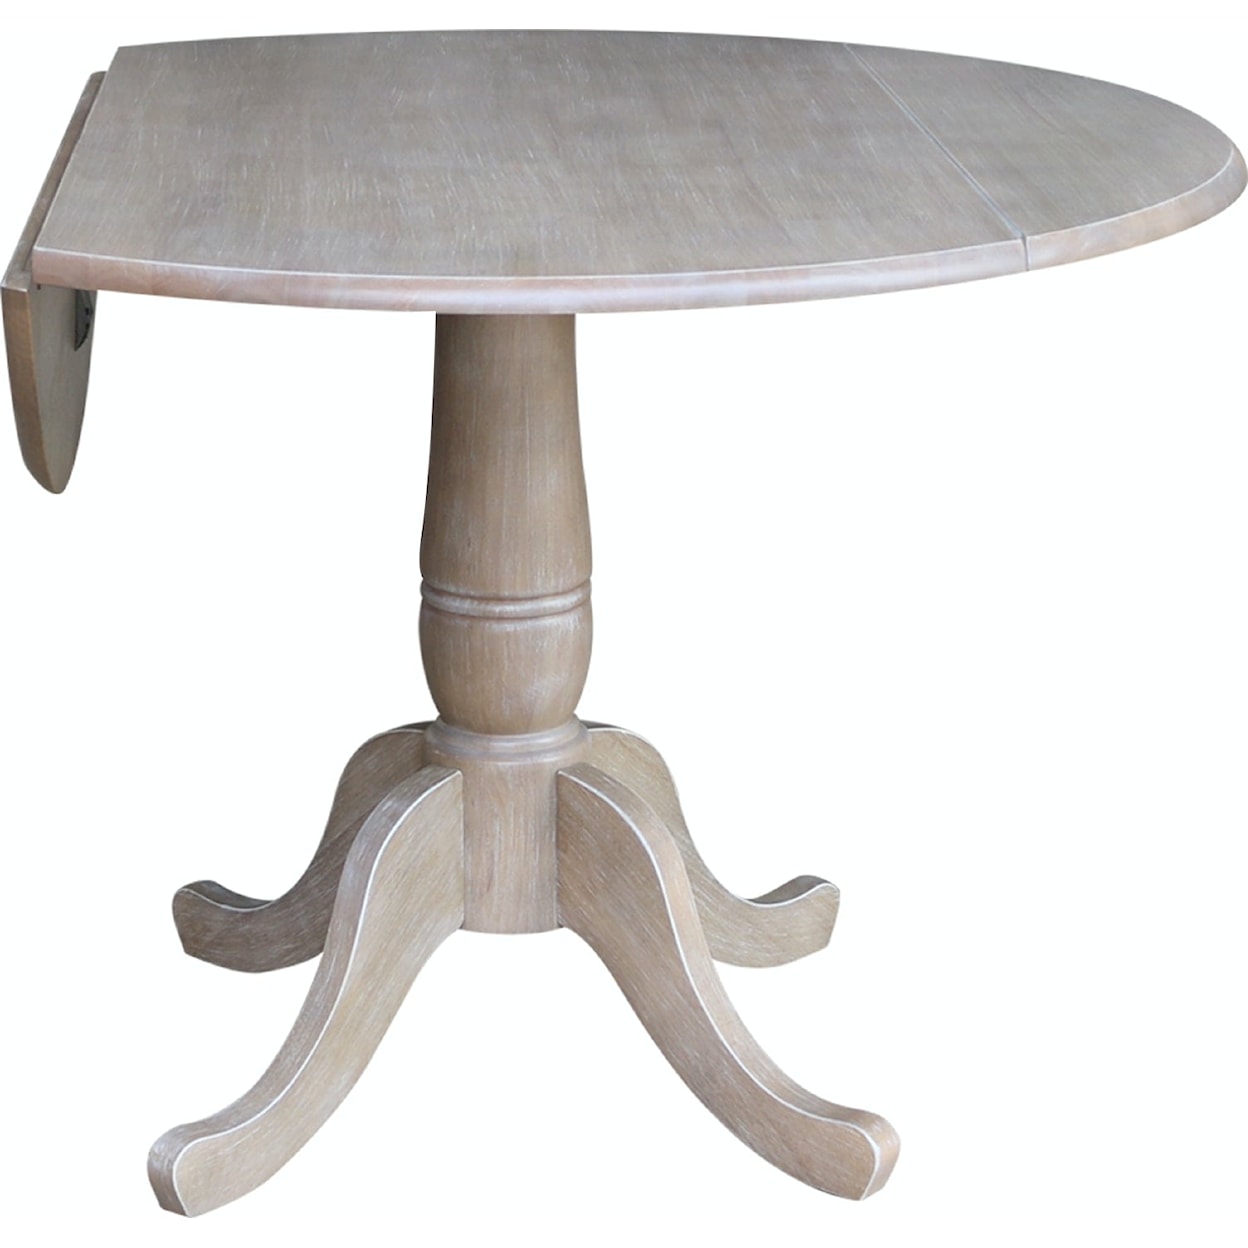 John Thomas Dining Essentials Round Dropleaf Pedestal Table in Taupe Gray